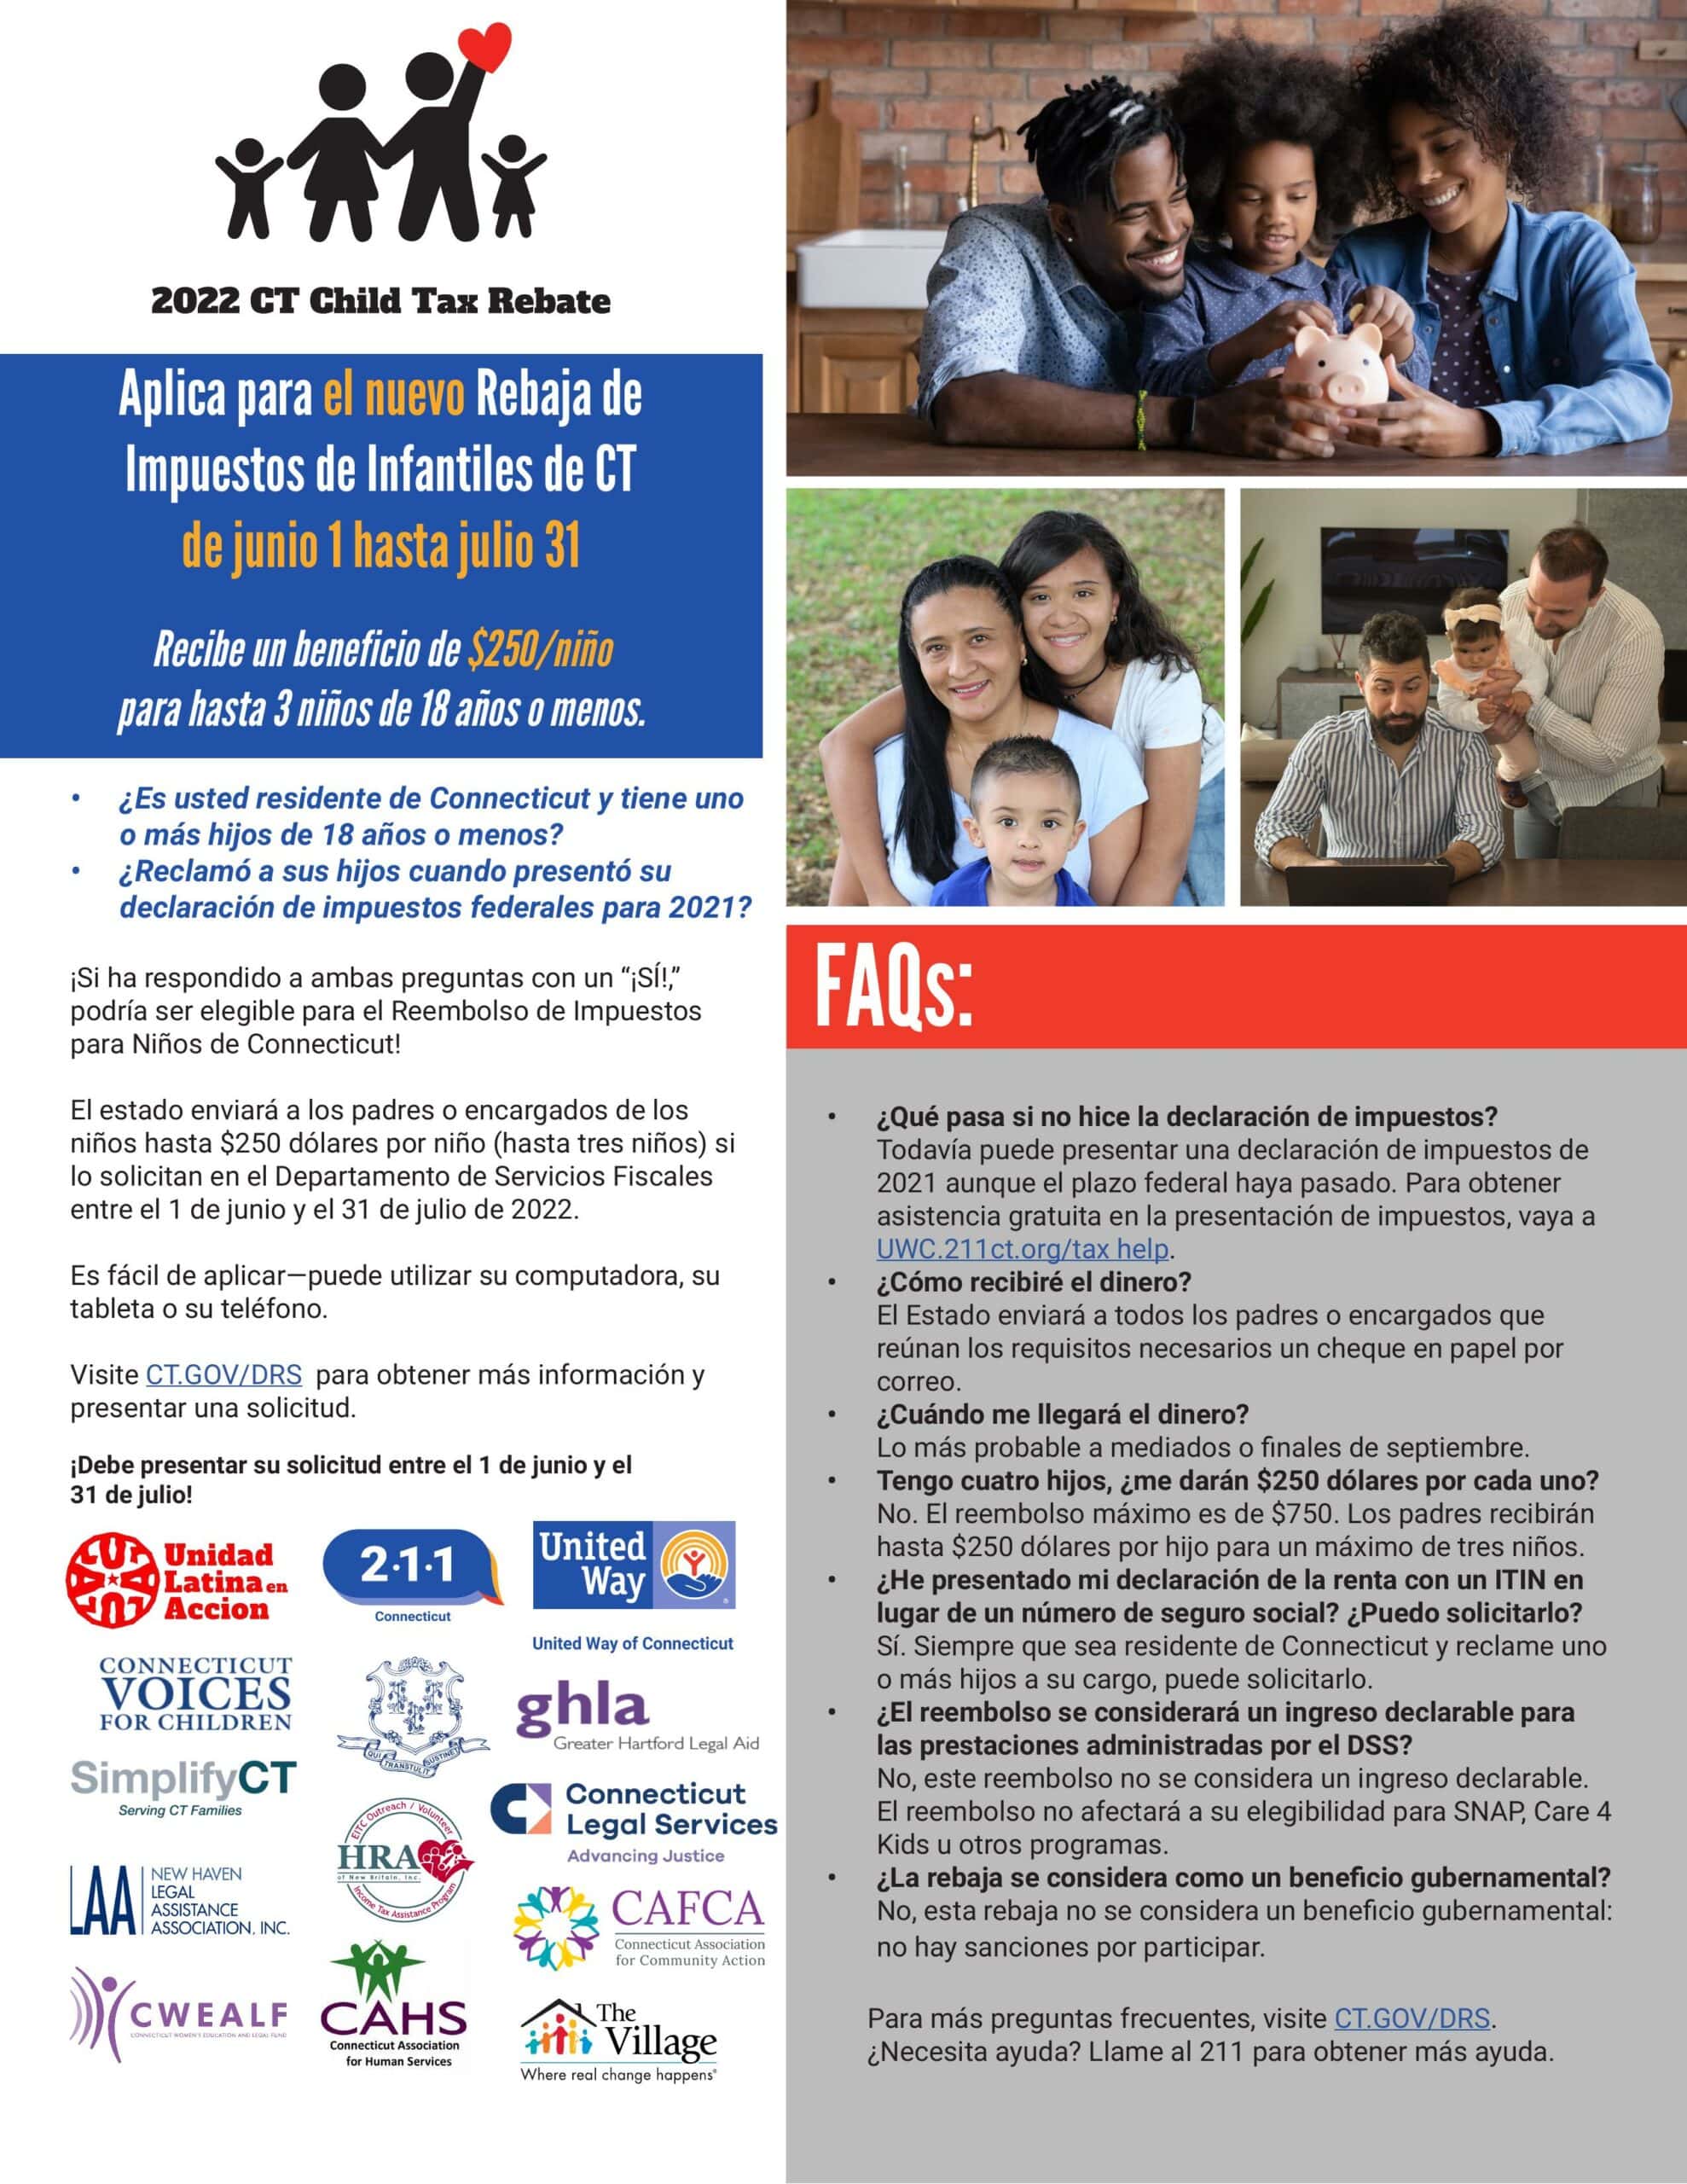 ct-s-new-child-tax-rebate-connecticut-association-for-community-action